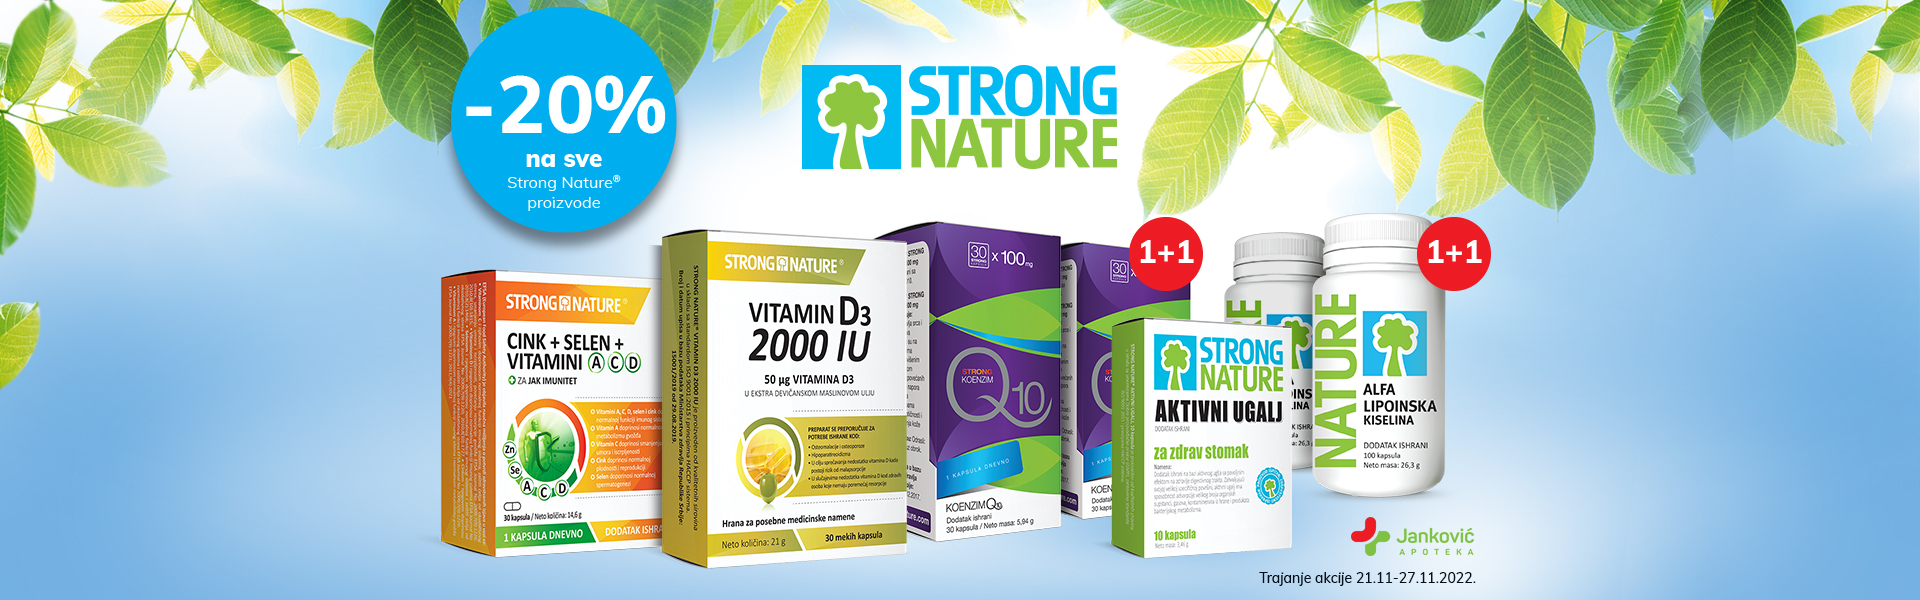 Strong nature 20%